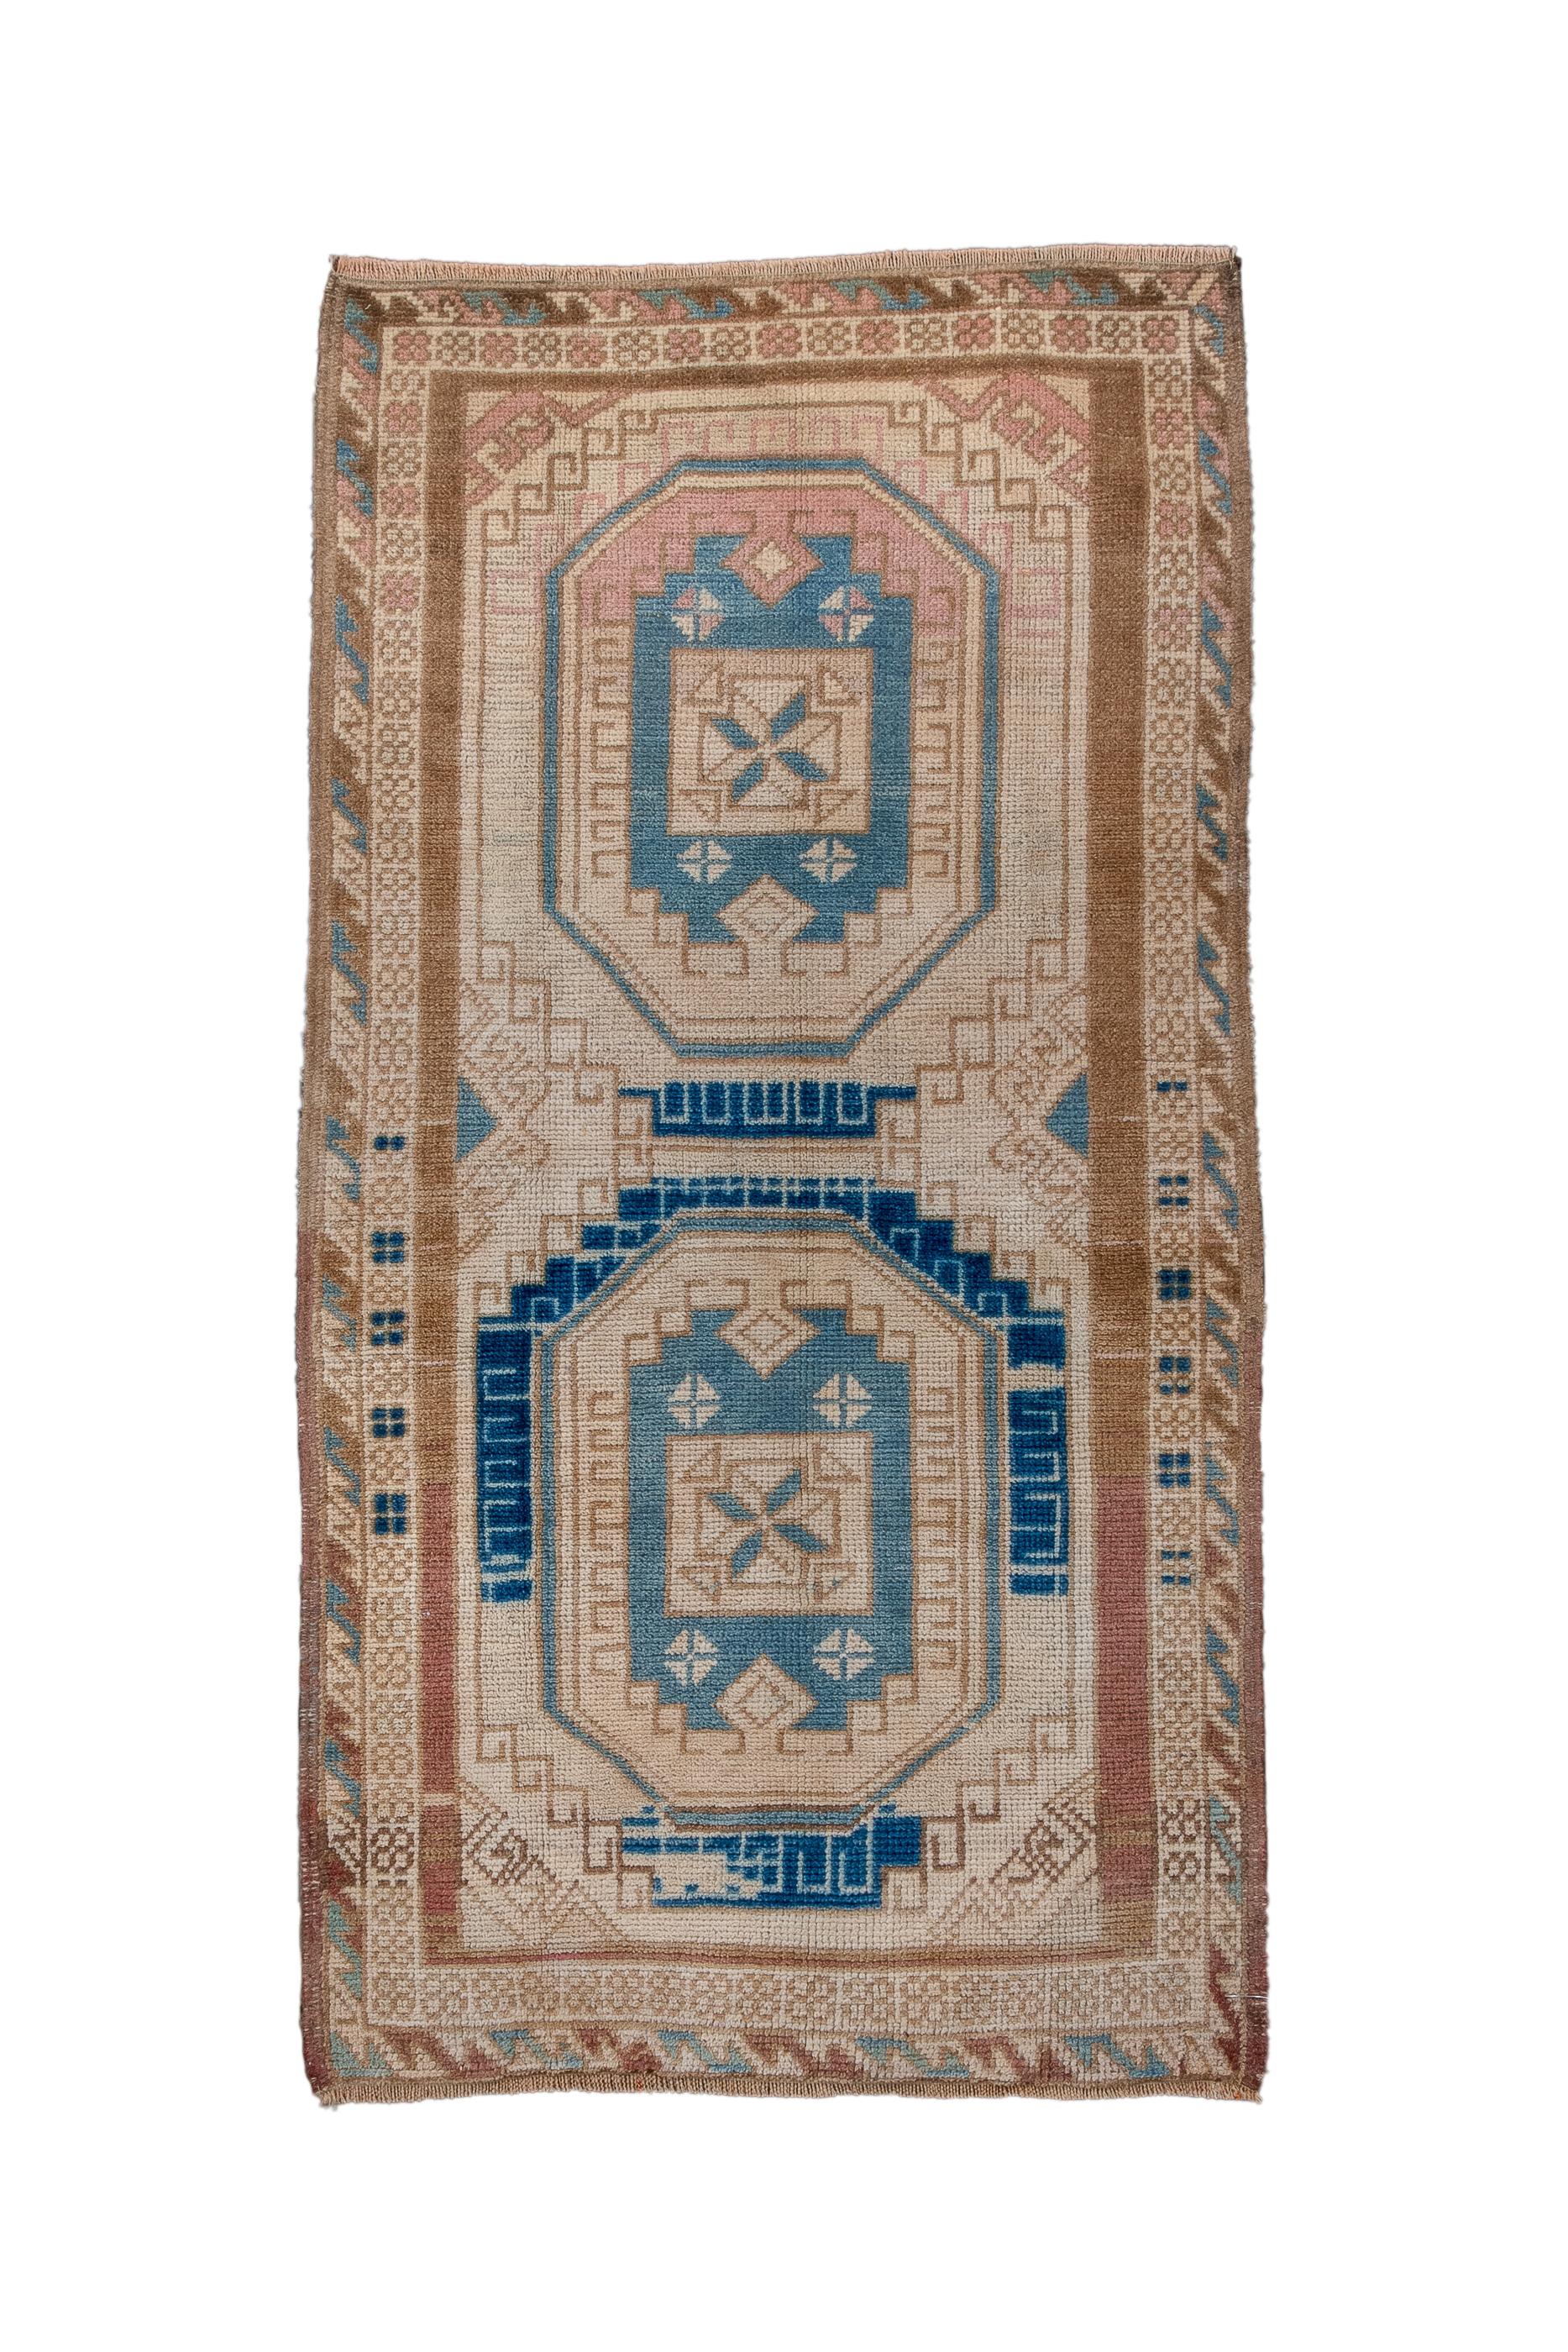 This ruglet shows a cream field with two large octagonal medallions, each enclosing a doubly indented panel.  Stepped outlines for each medallion. Hooked, secondary motives at sides and corners of field. All wool, moderate weave. Royal blue and teal